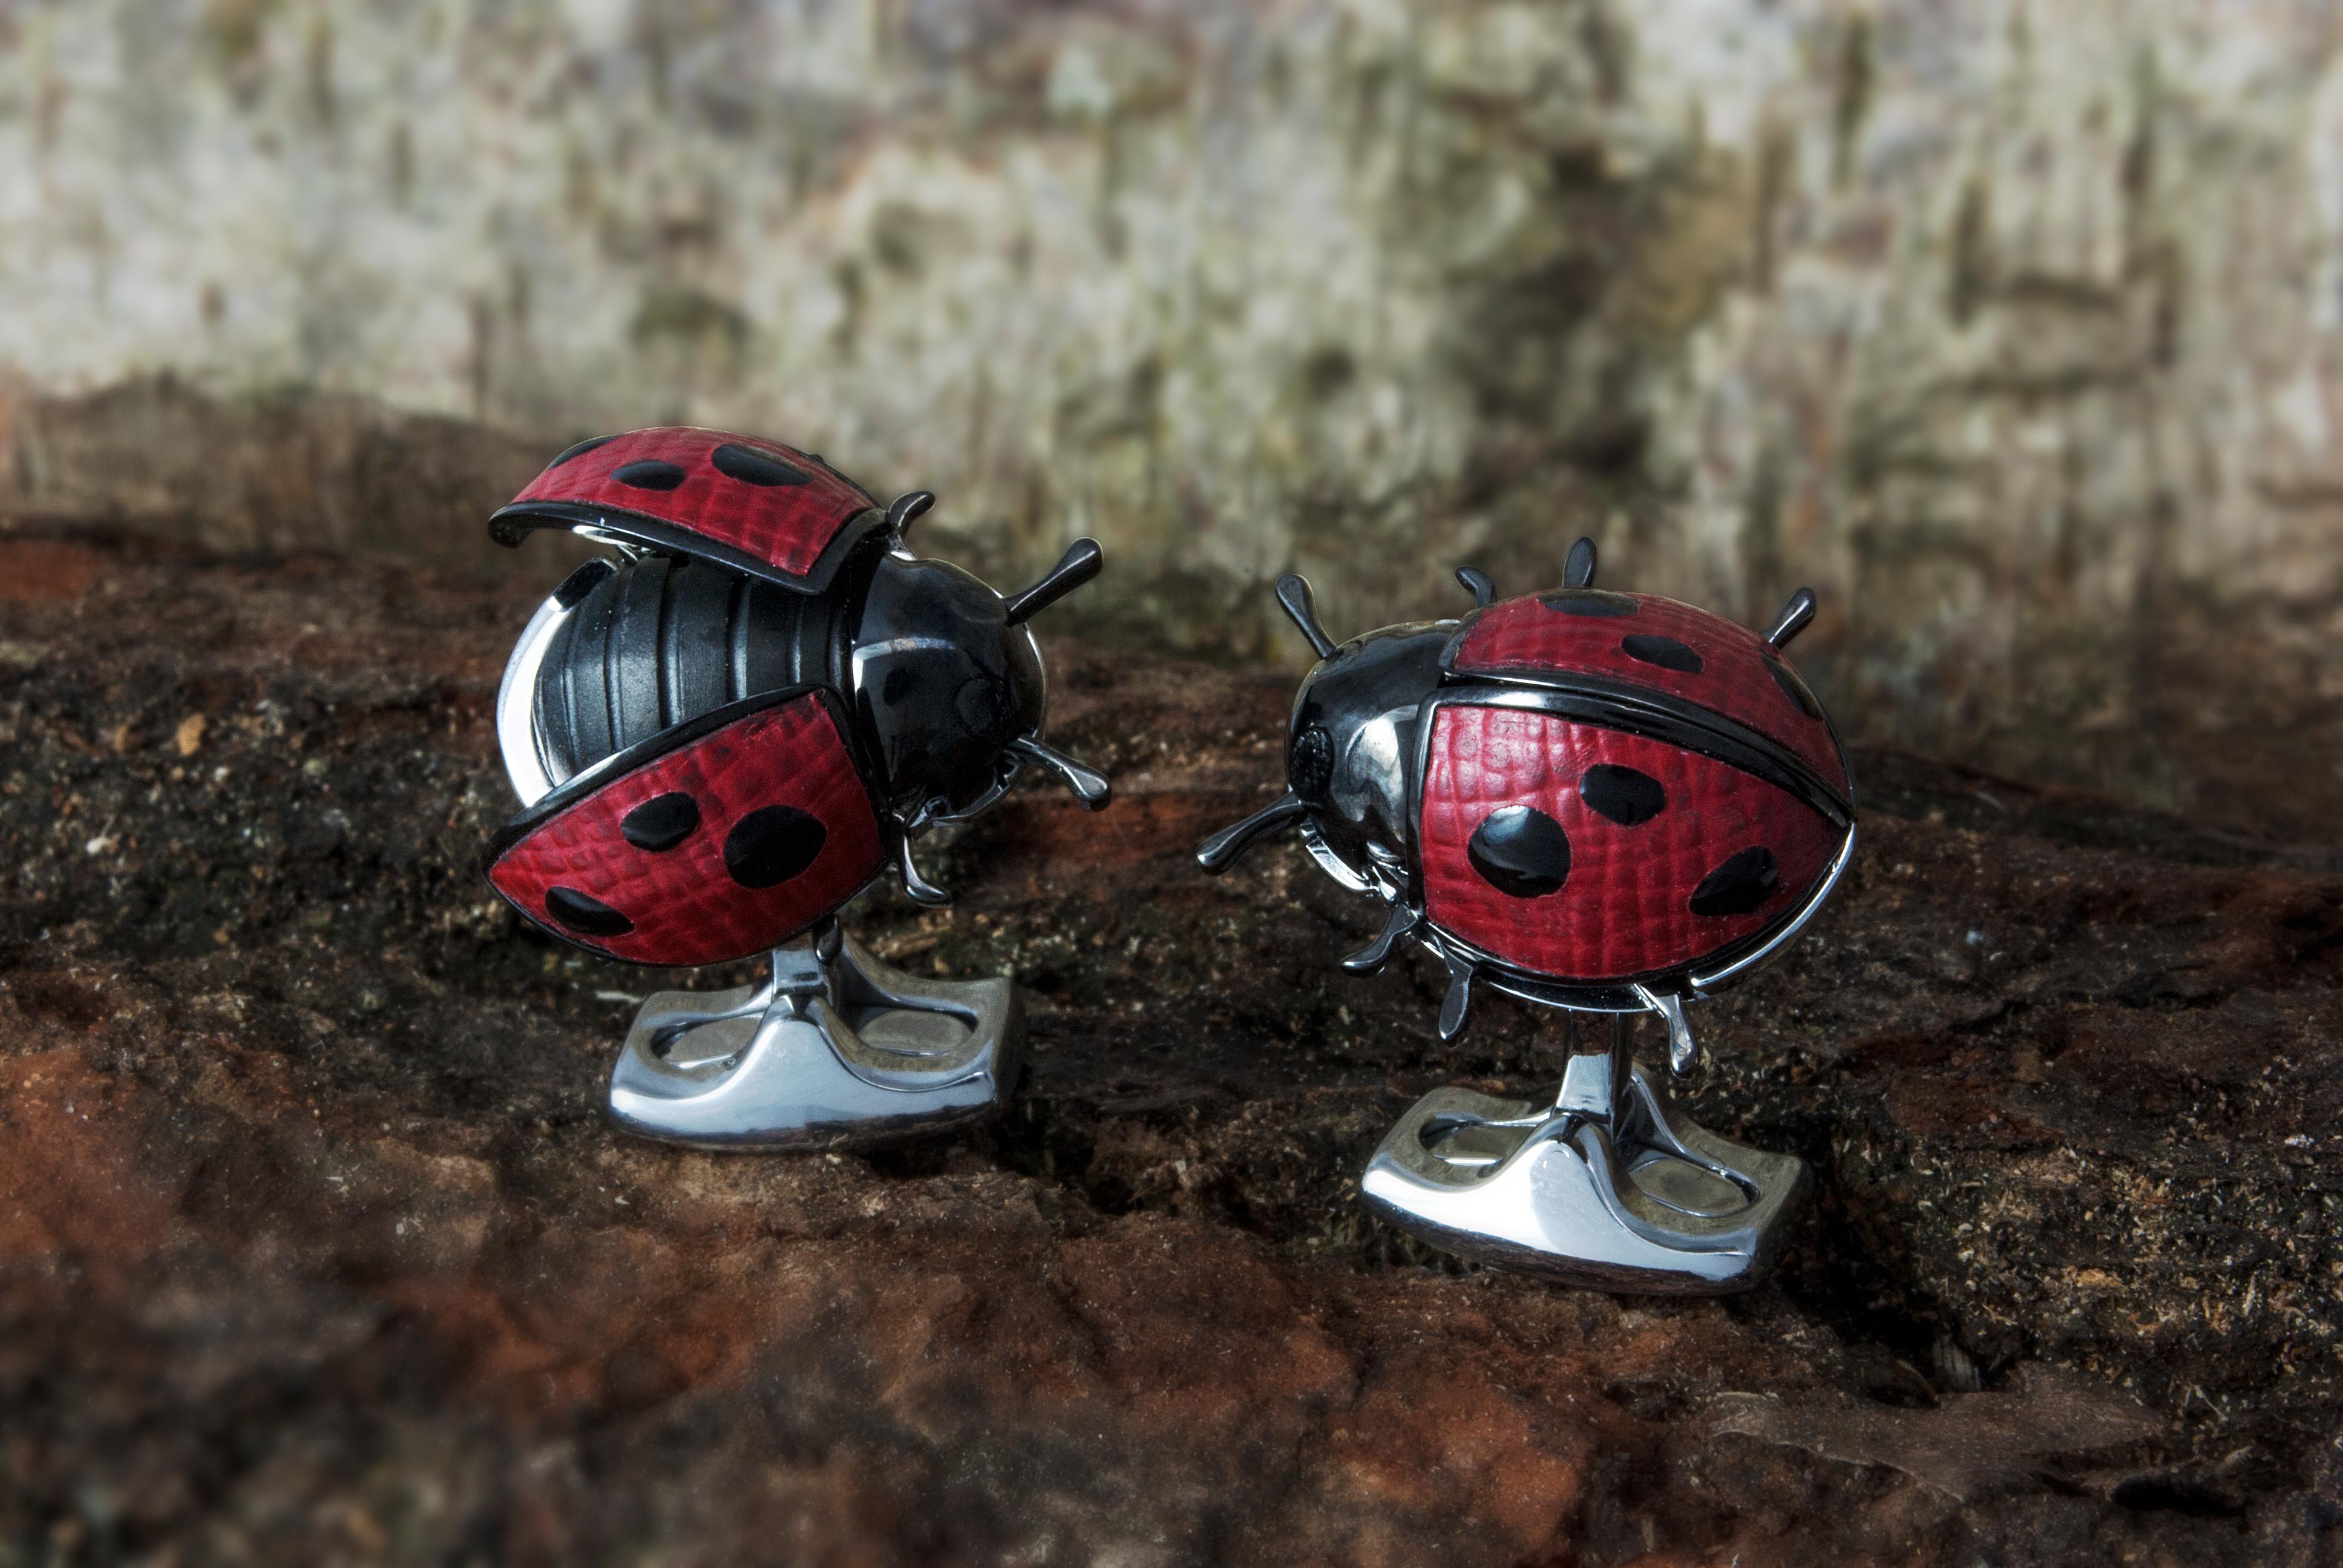 DEAKIN & FRANCIS, Piccadilly Arcade, London

These beautiful, unique ladybird cufflinks are sure to knock the spots off anyone who wears them!

Inspired by childhood nature trails and the great outdoors, these delightfully friendly little love bugs